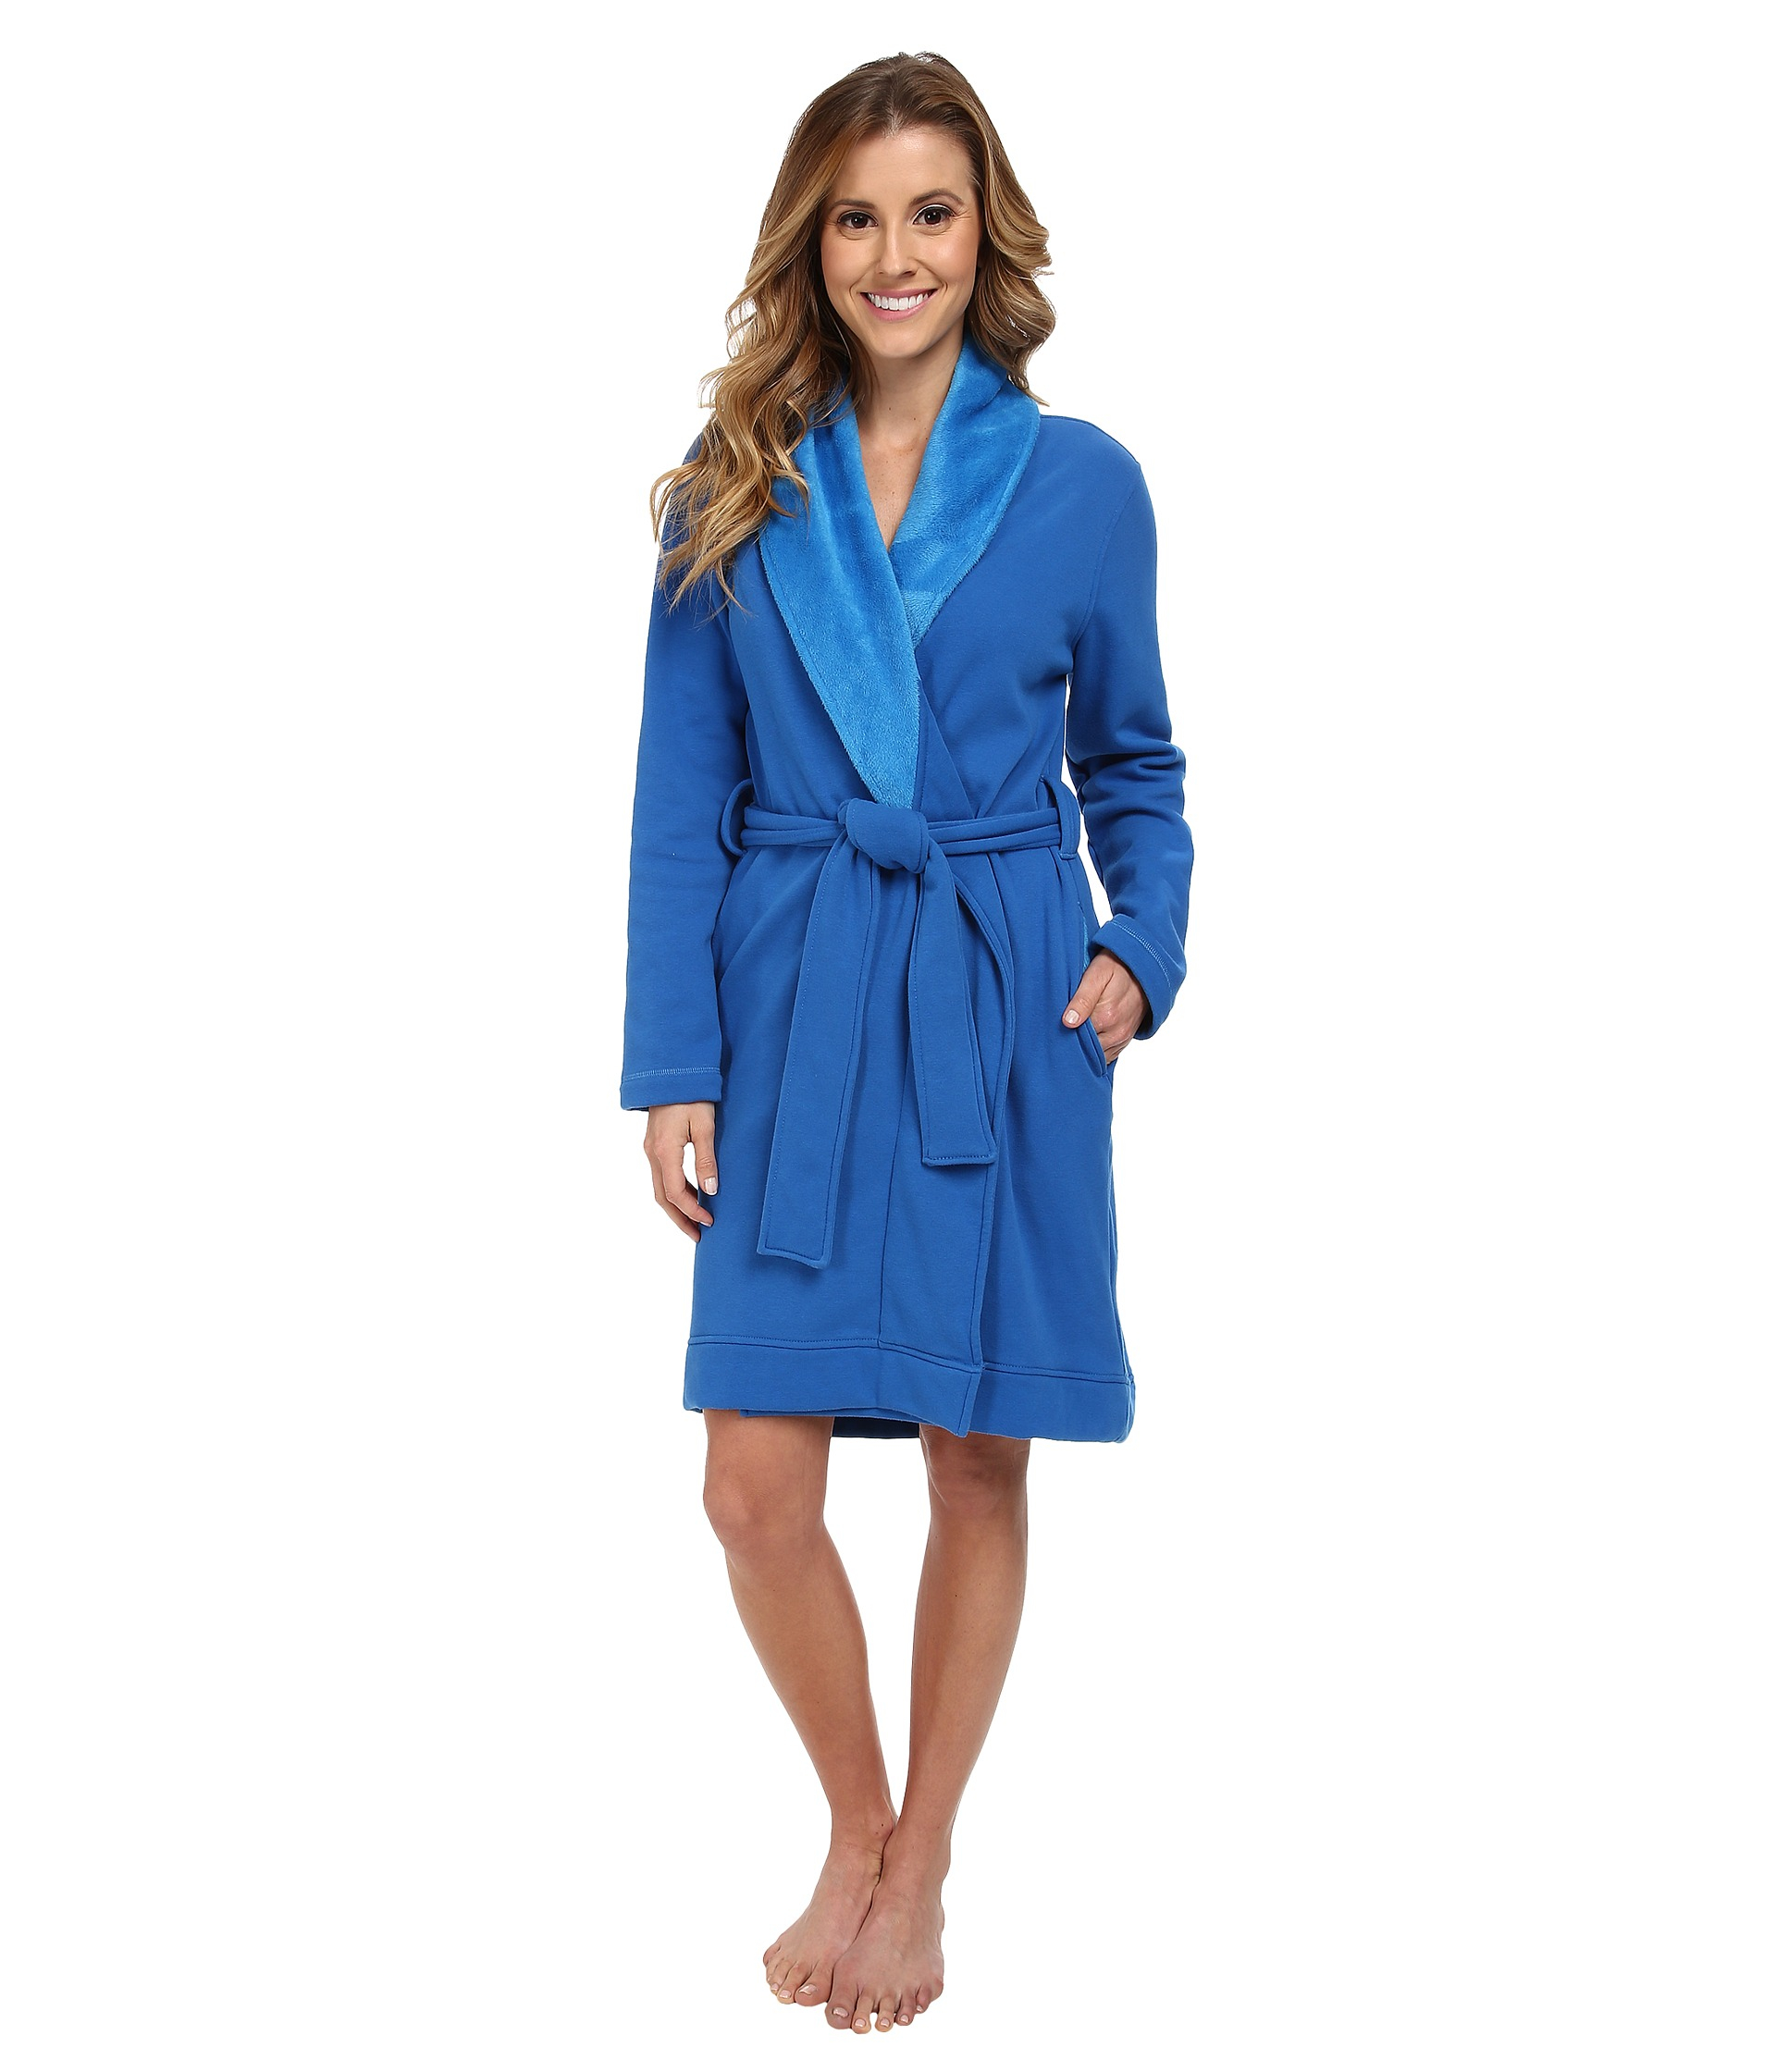 Ugg Blanche Robe in Blue (French Blue)